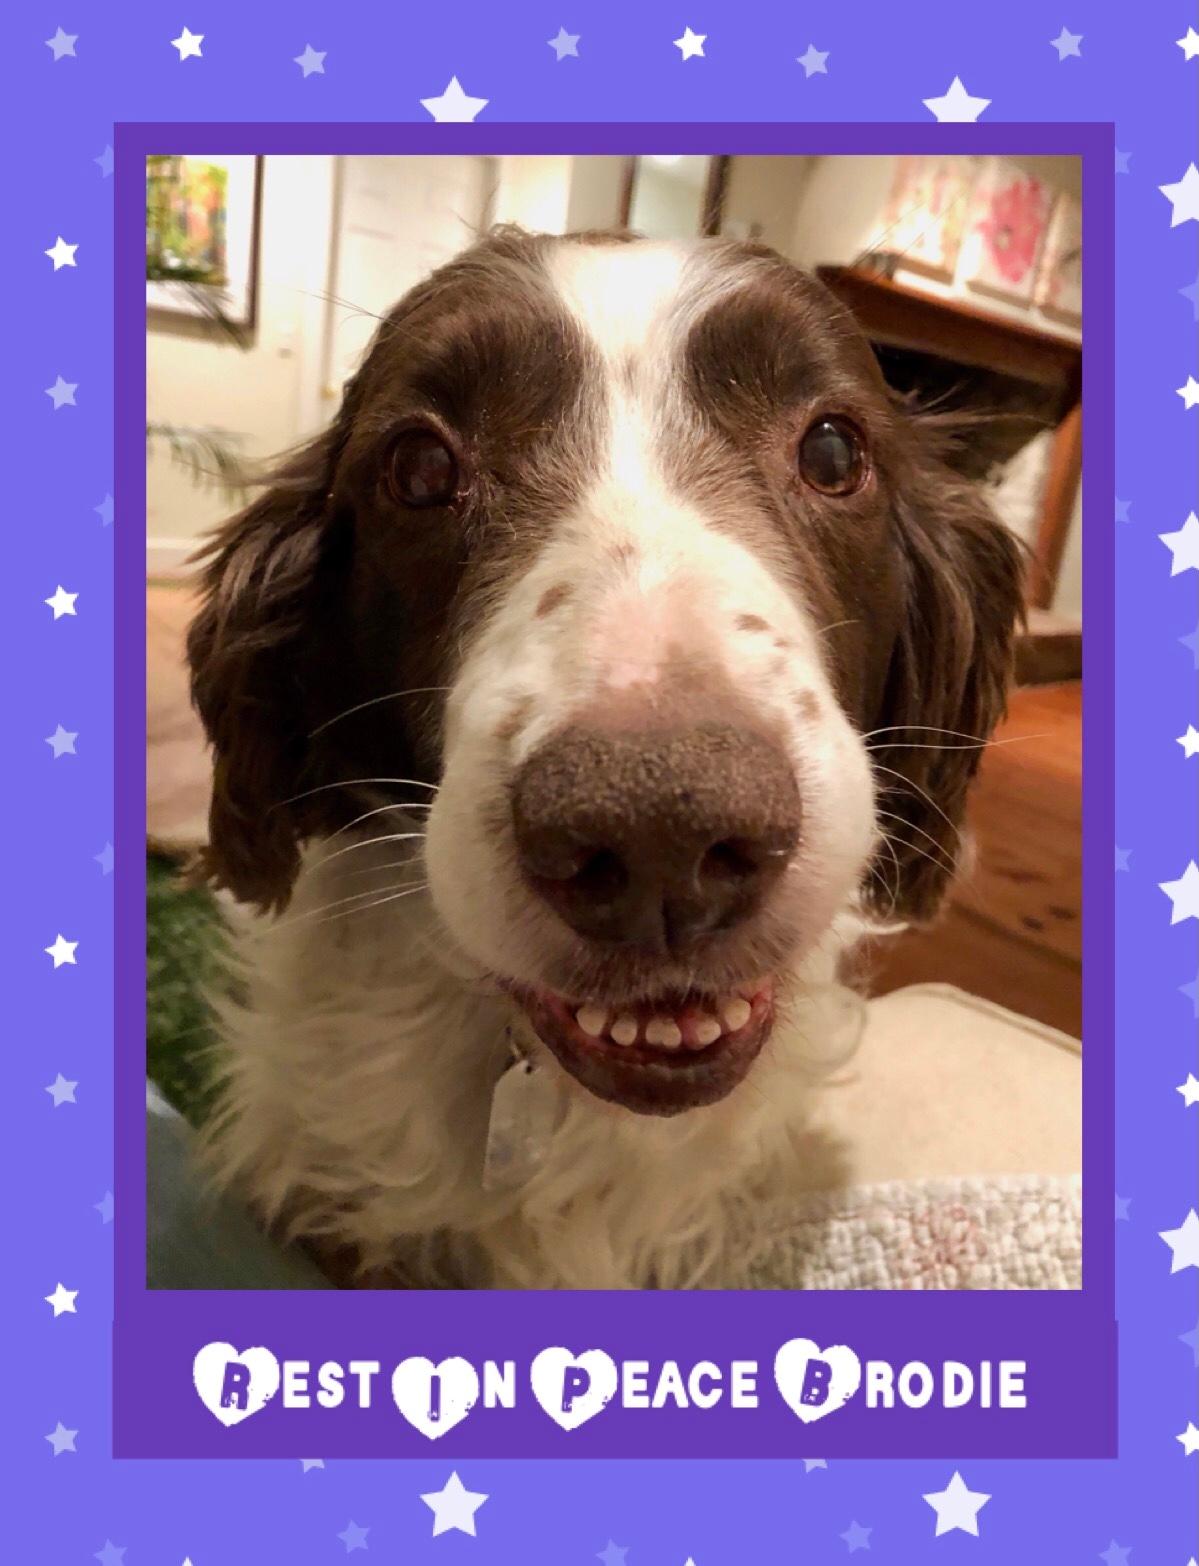 Brodie, a sweet and shy Springer Spaniel, recently died